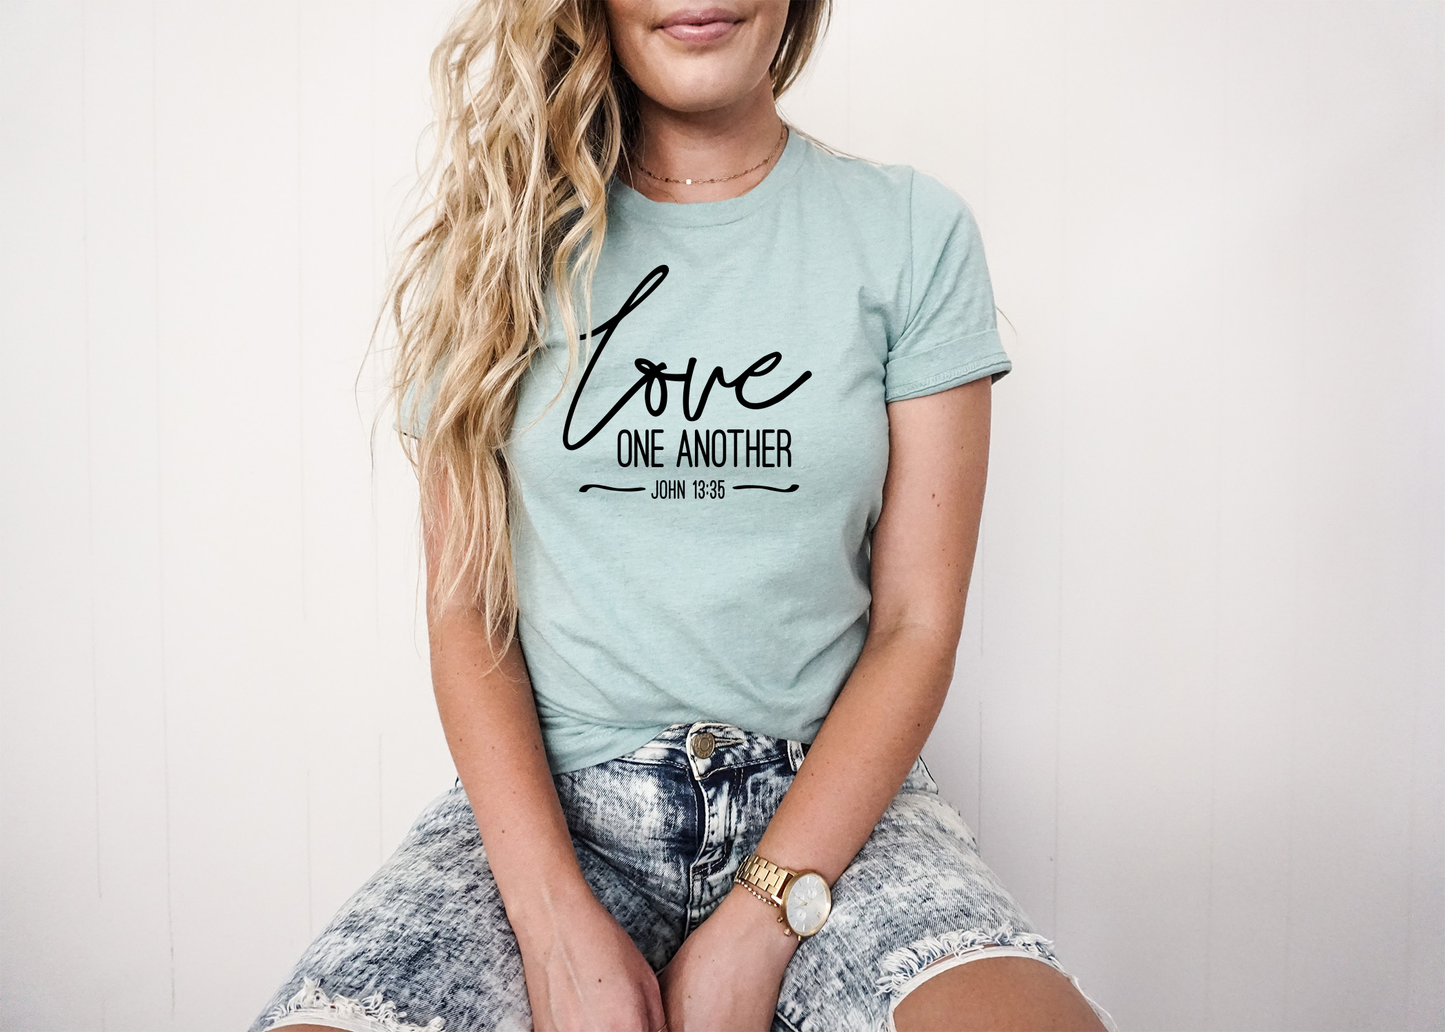 Love One Another (John 13:35) Tee